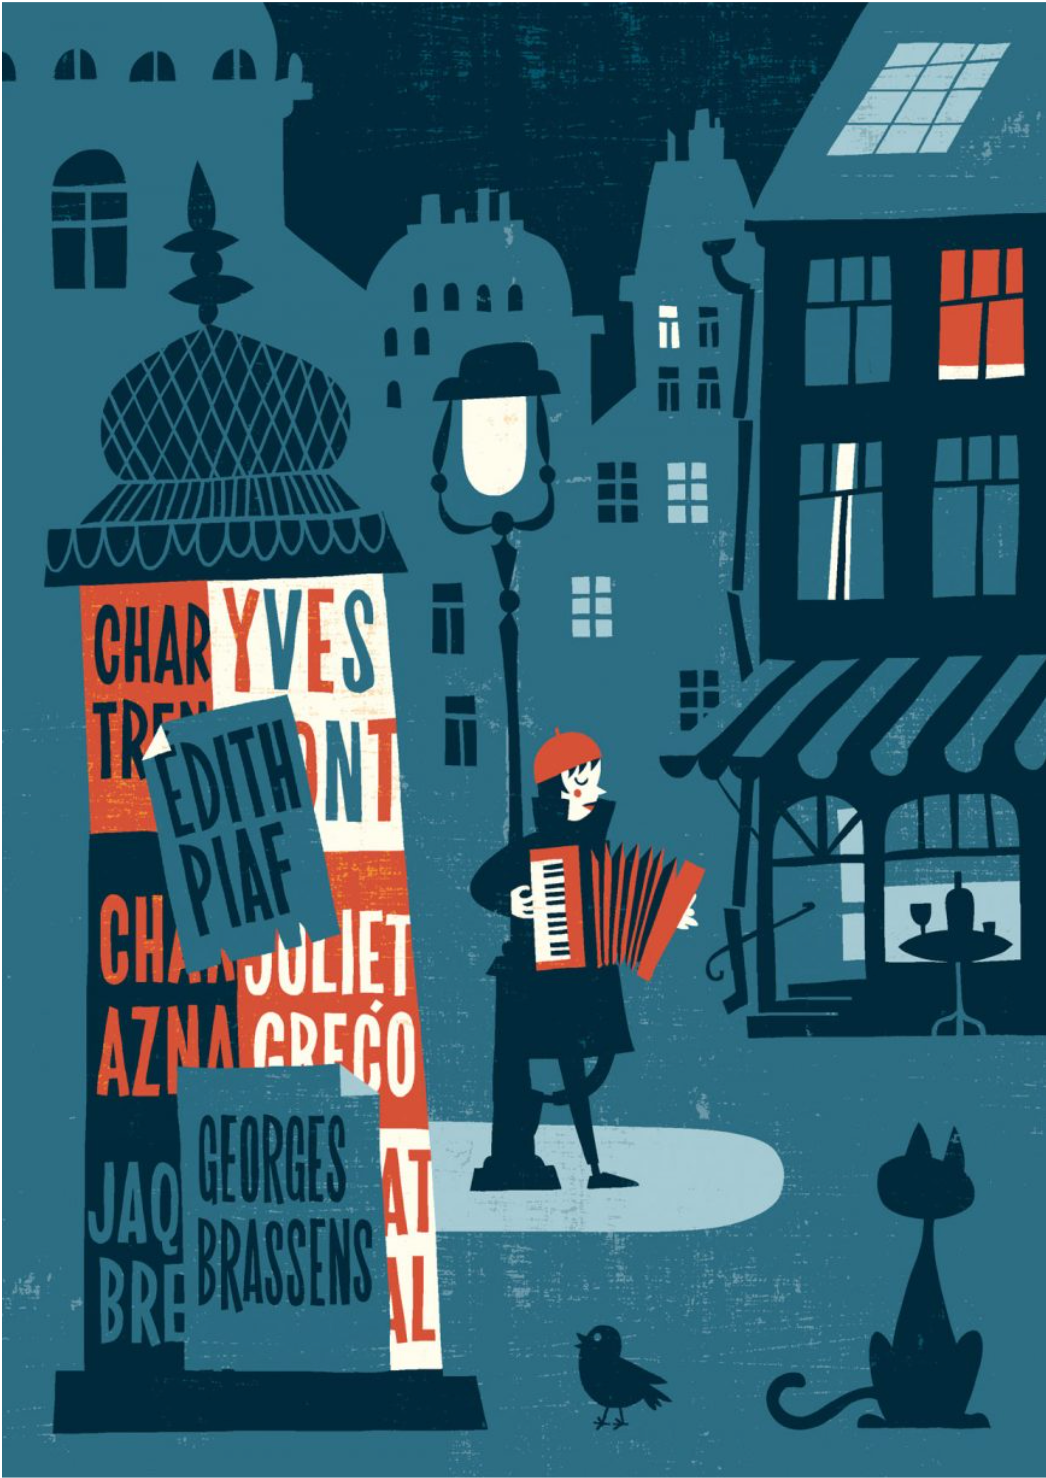 Illustration of a lone accordion player against a lamppost on a city corner in three shades of blue with red accents.